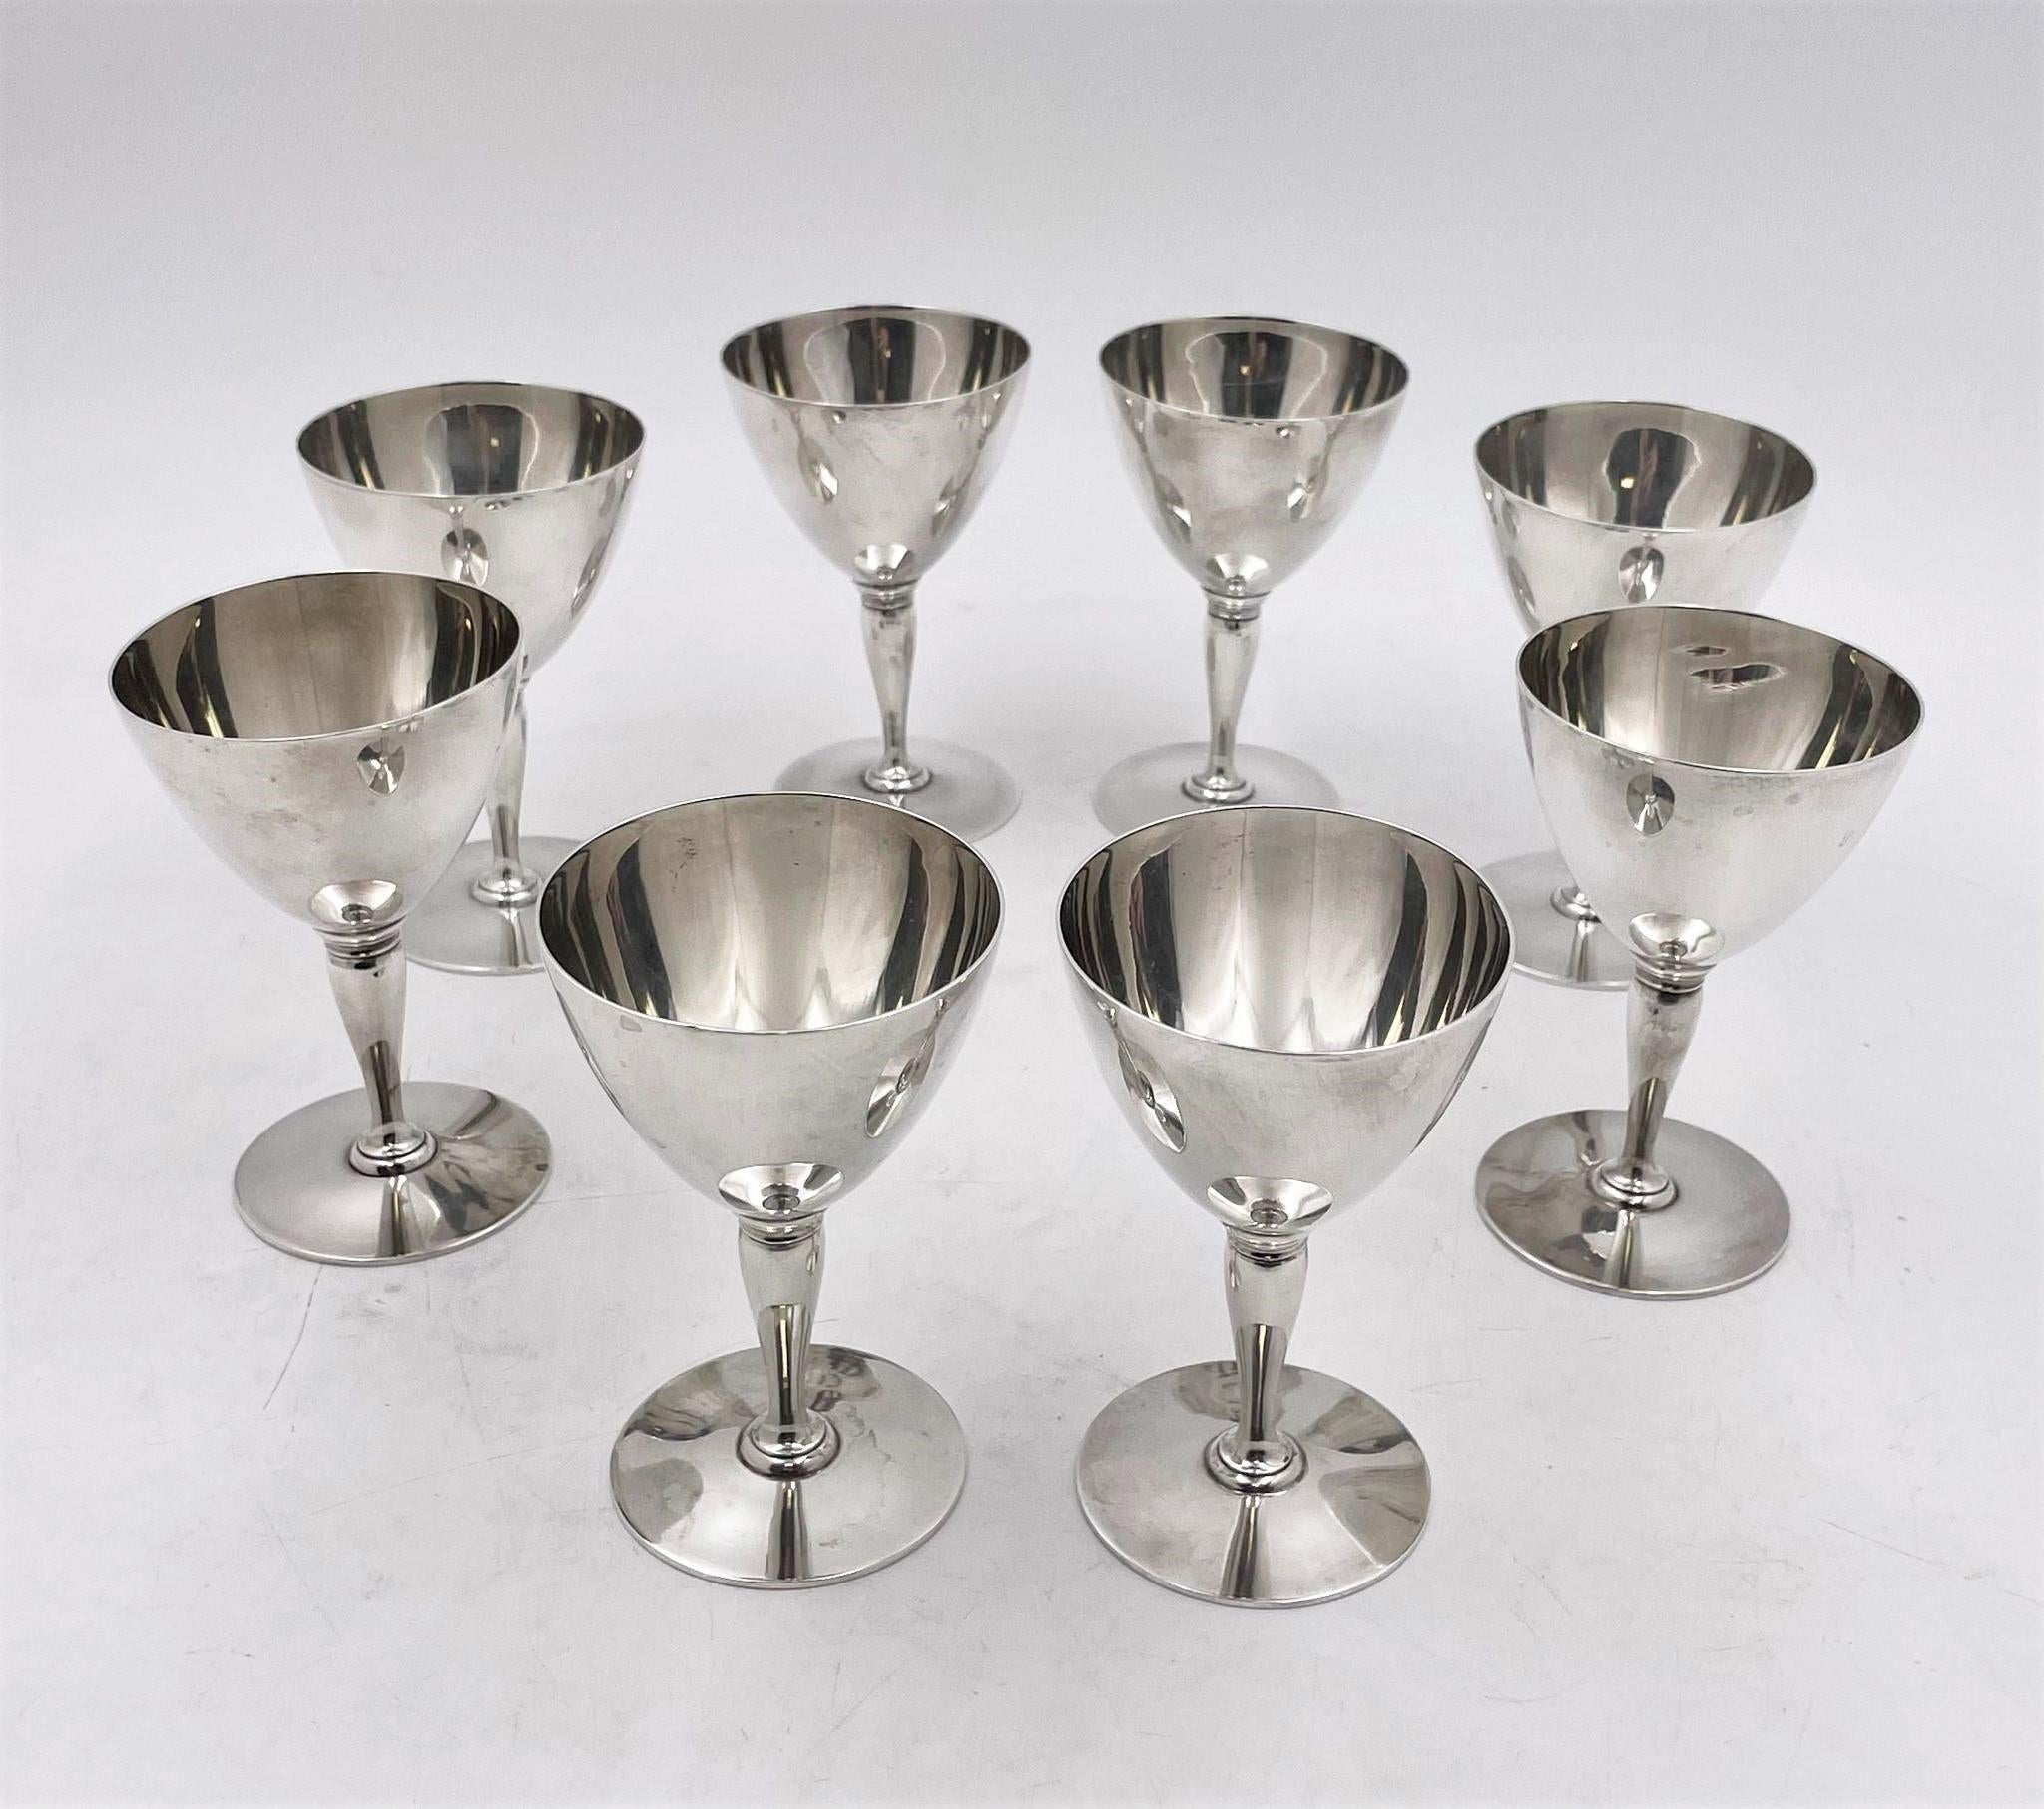 Tiffany & Co. sterling silver 8-piece set of goblets (4 in x 2.5 in) in elegant Art Deco style. It has a beautiful, tampered stem and a circular base. It's from 1915 and weighs 30.4 oz.

Founded in 1837 by Charles Lewis Tiffany and John B. Young